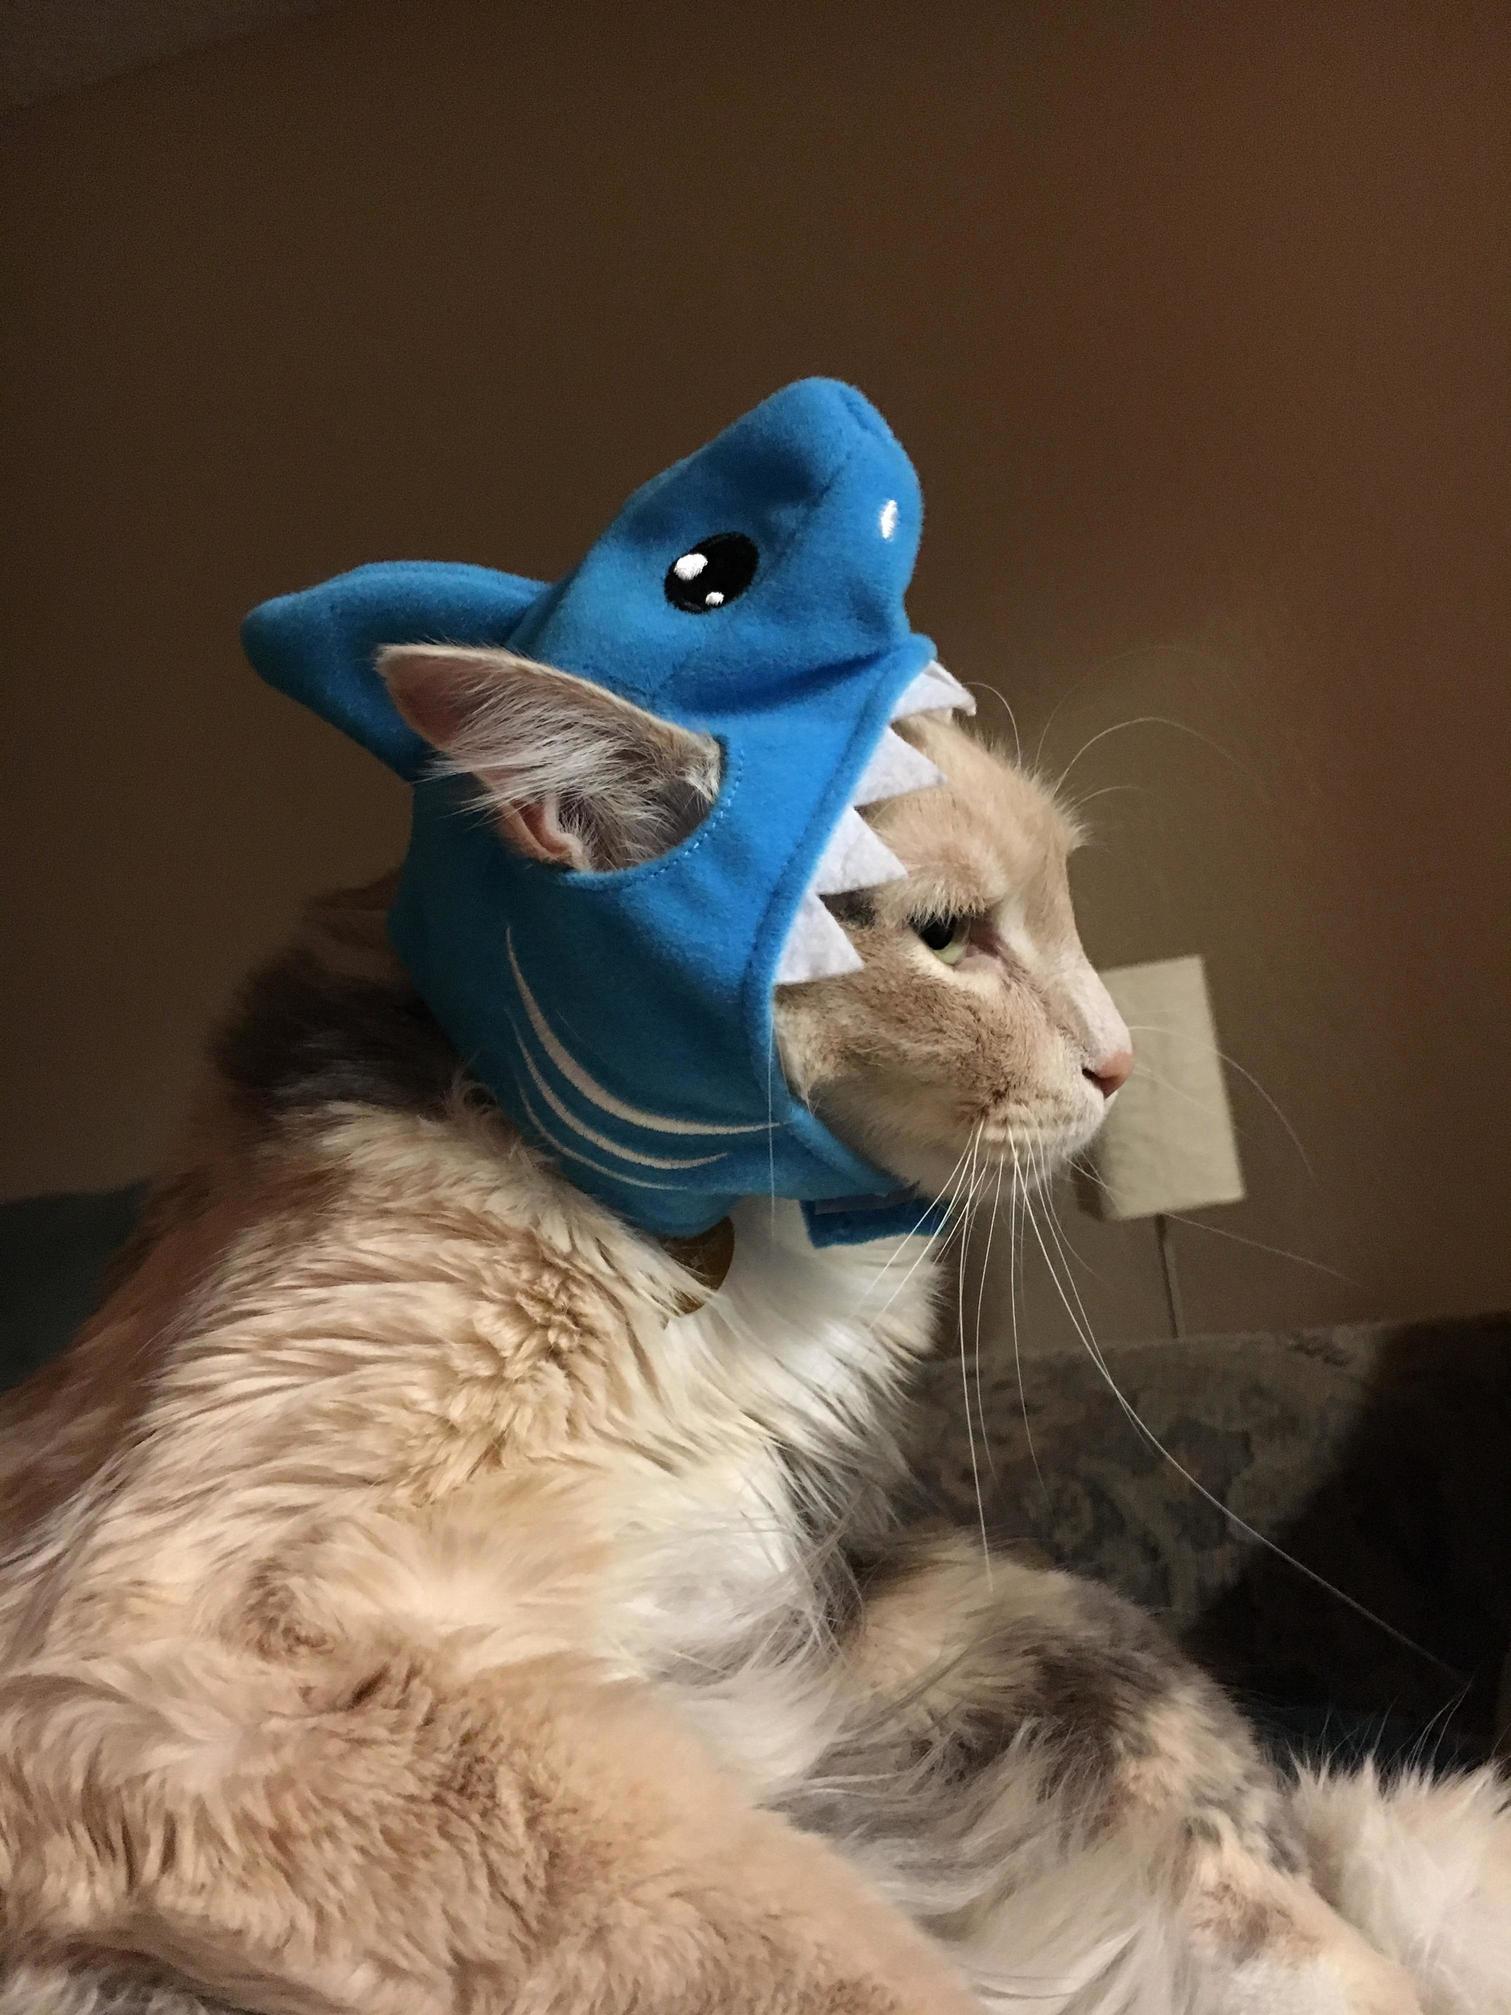 Pray for my fluffy girl serious head injuries from this horrific shark attack last night